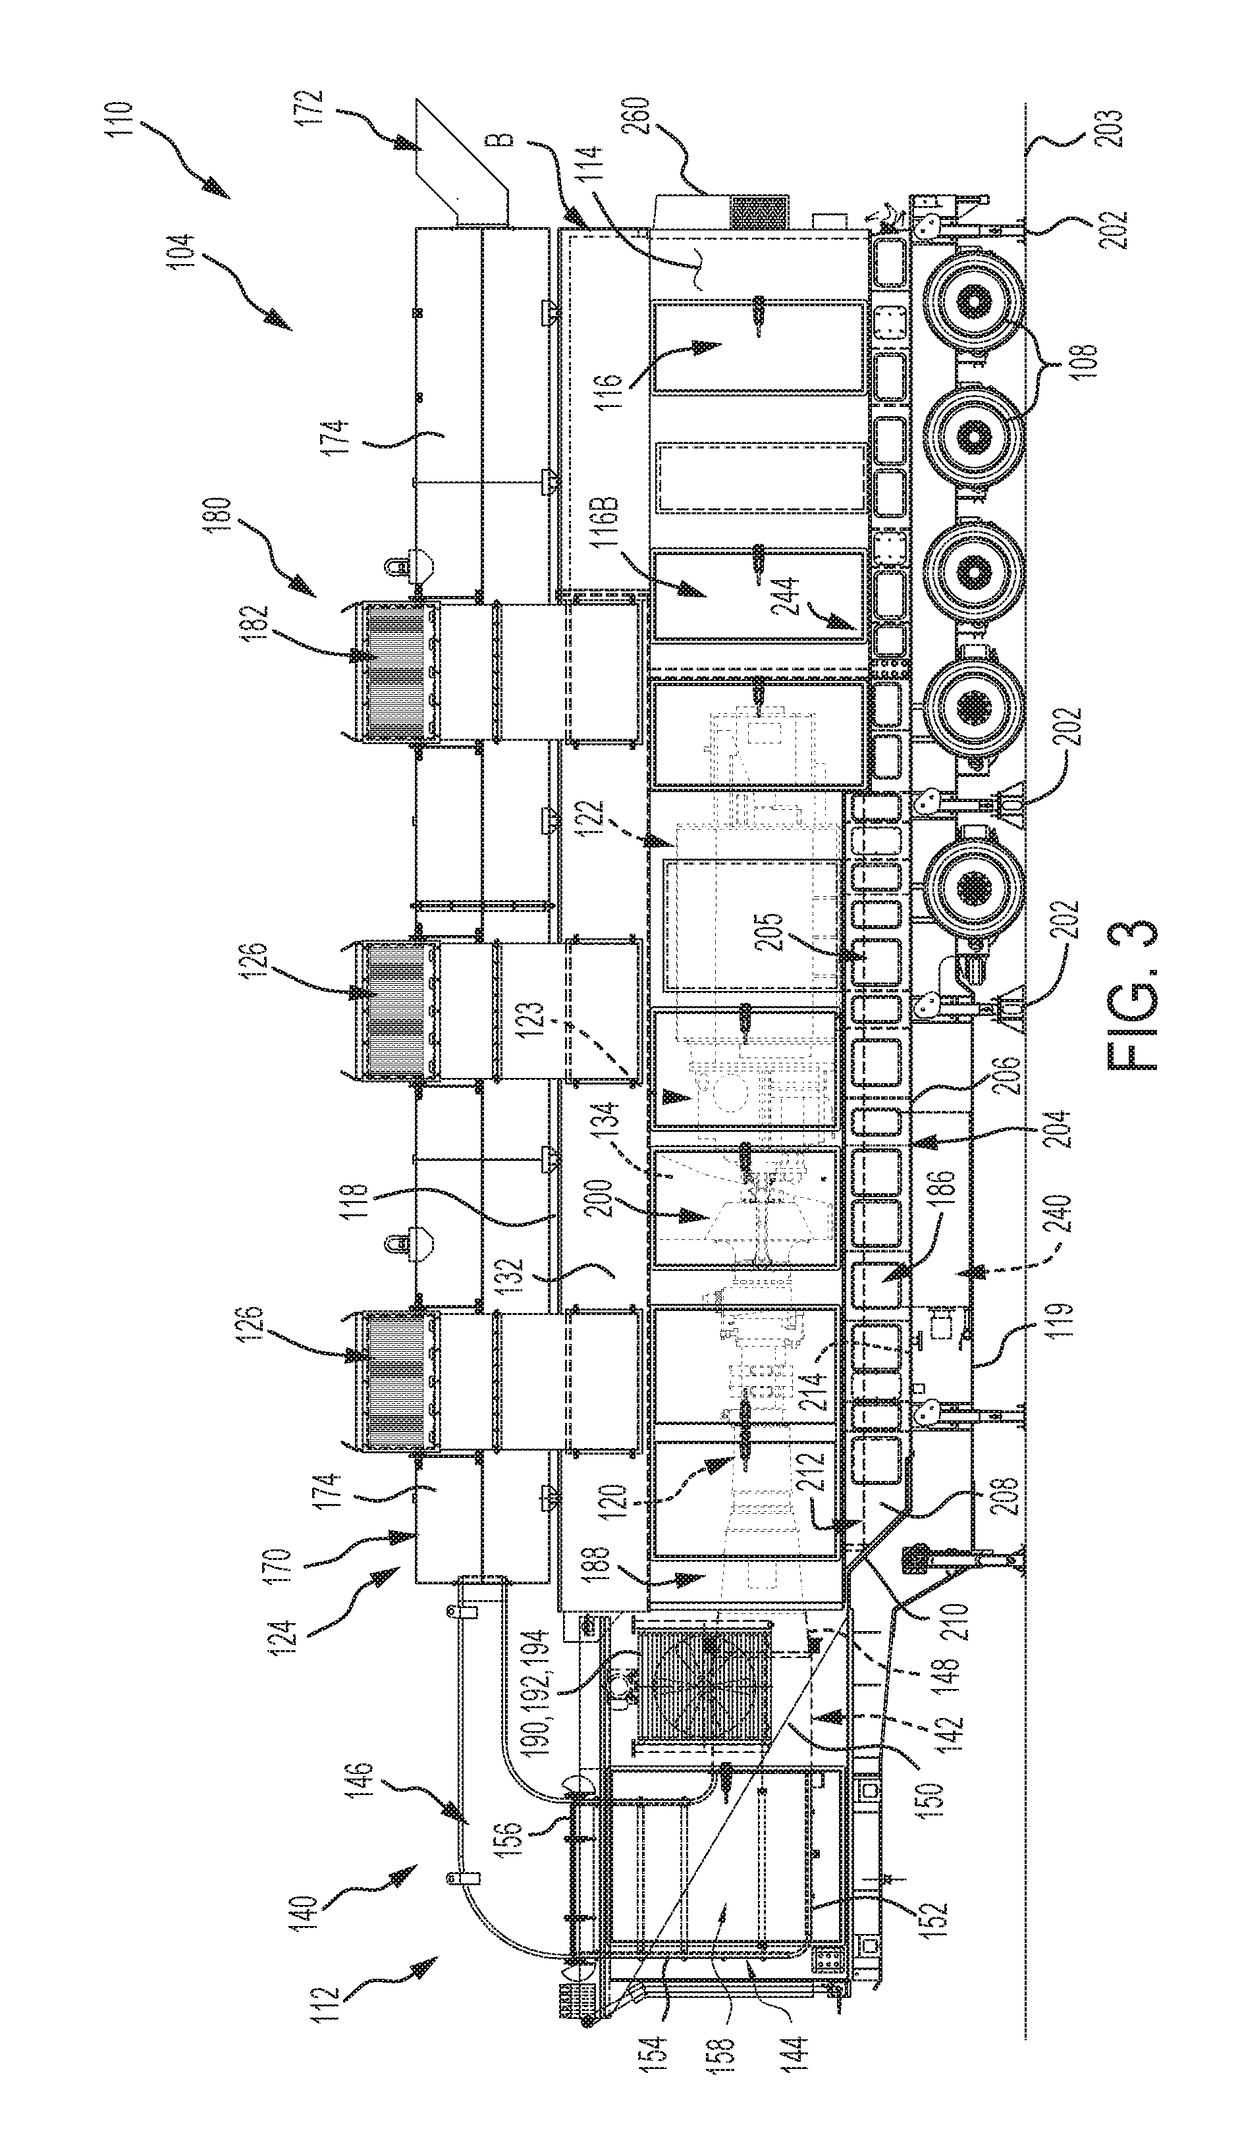 Mobile power generation system including air filtration